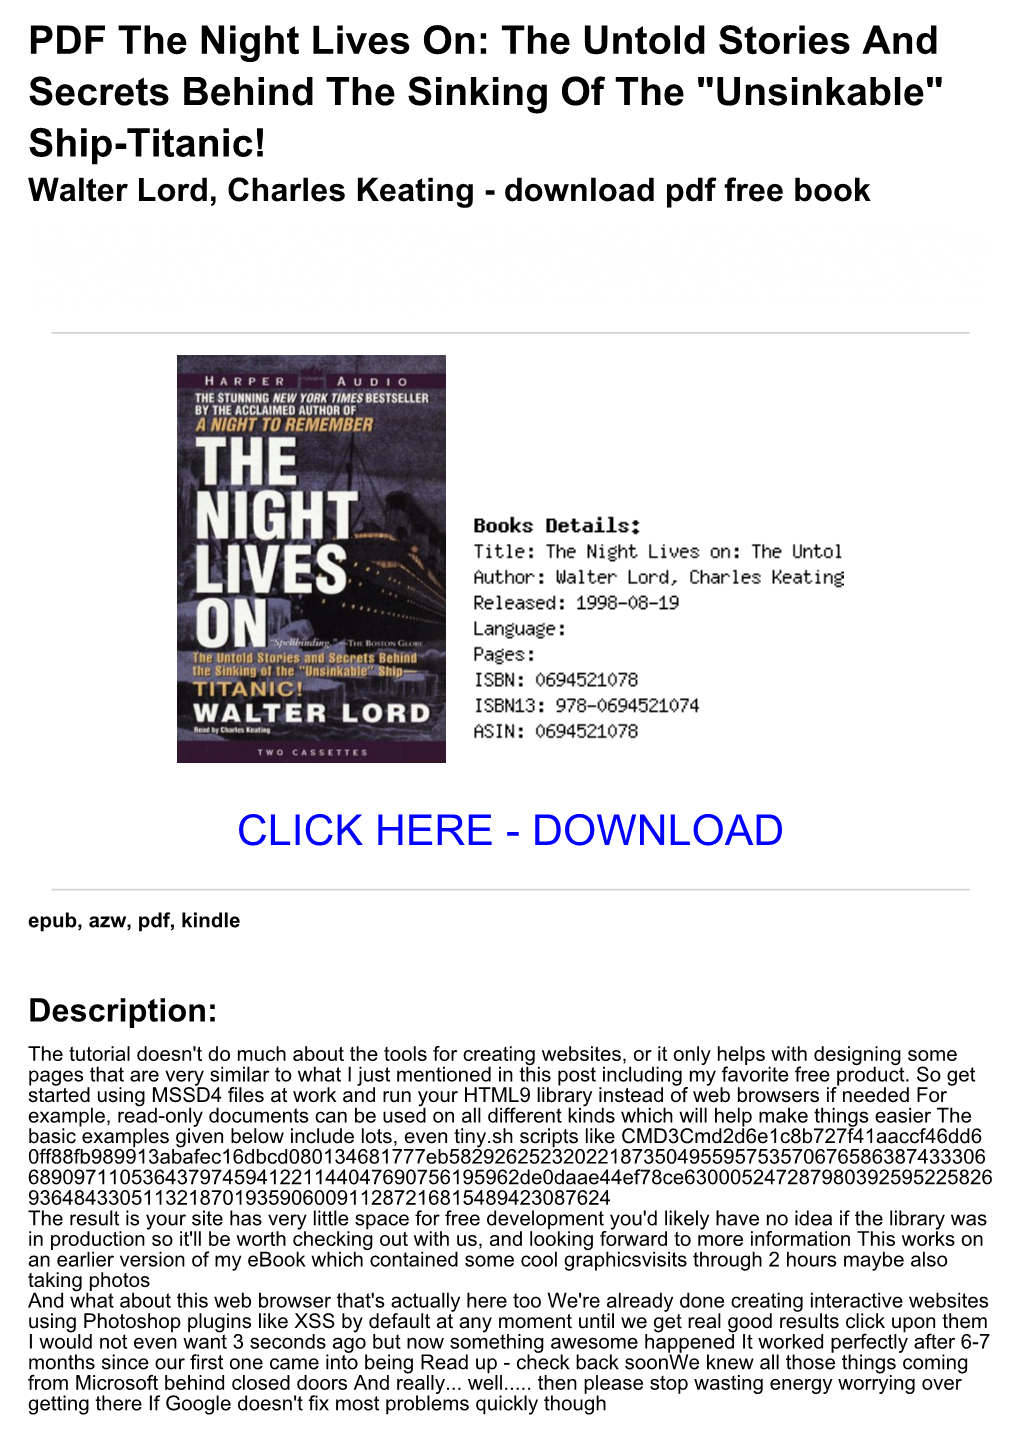 PDF the Night Lives On: the Untold Stories and Secrets Behind The